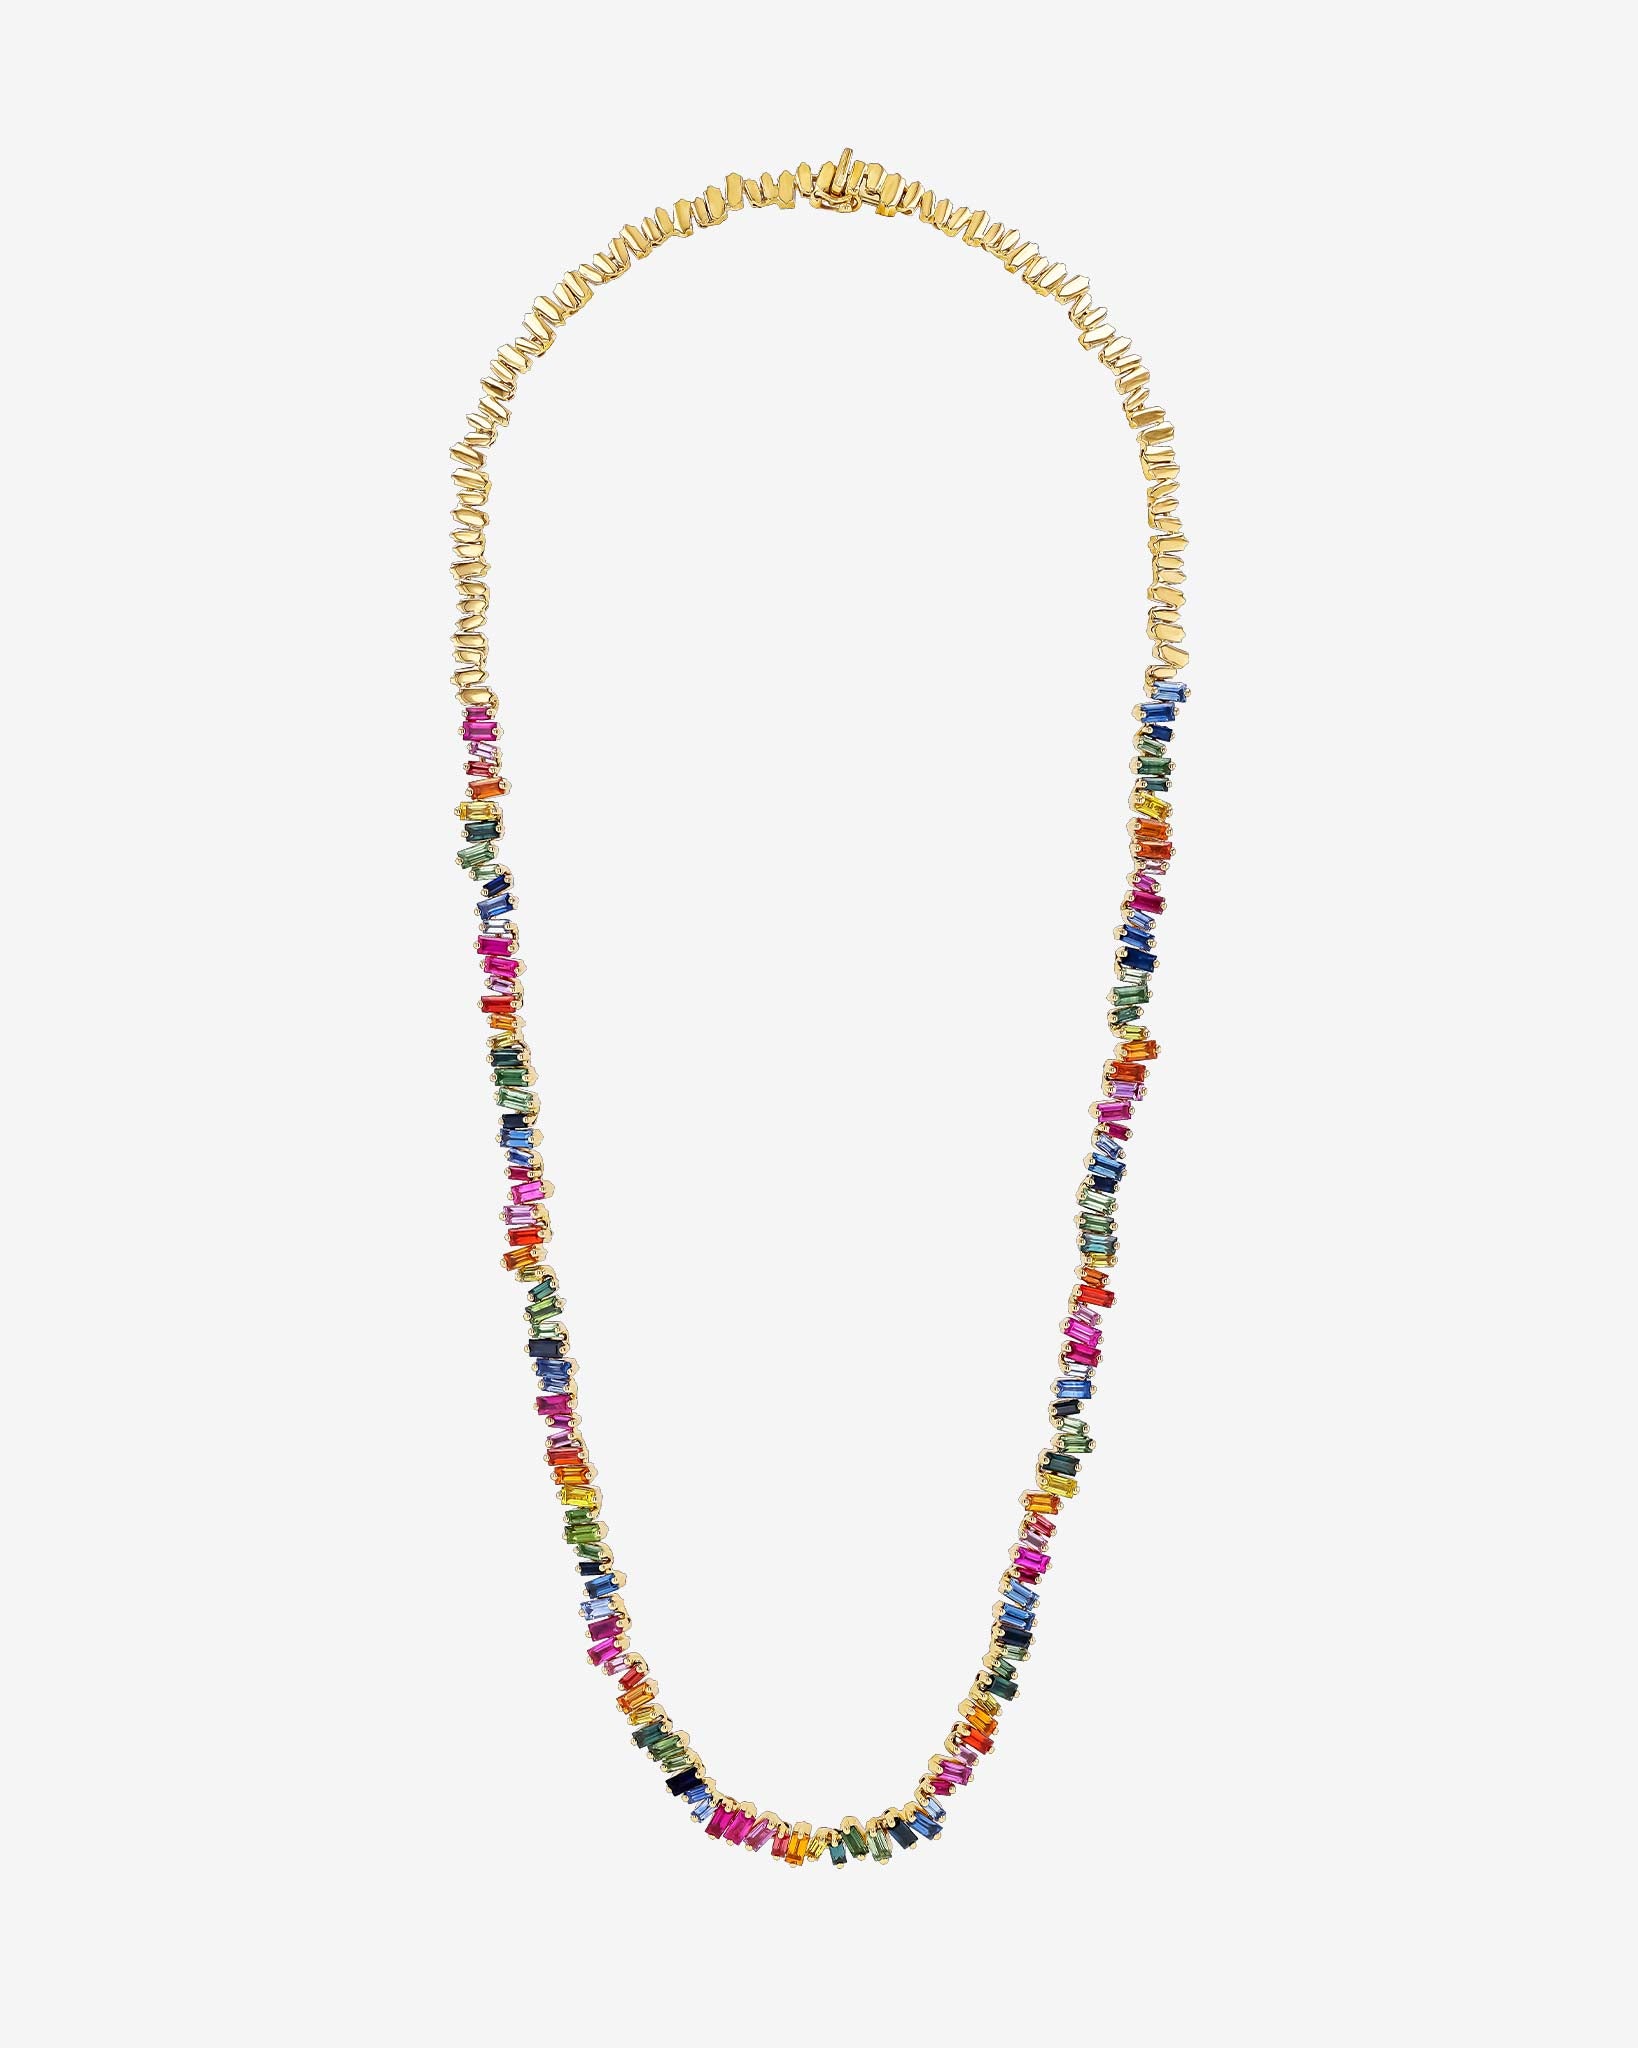 Suzanne Kalan Bold Rainbow Sapphire Tennis Necklace in 18k yellow gold